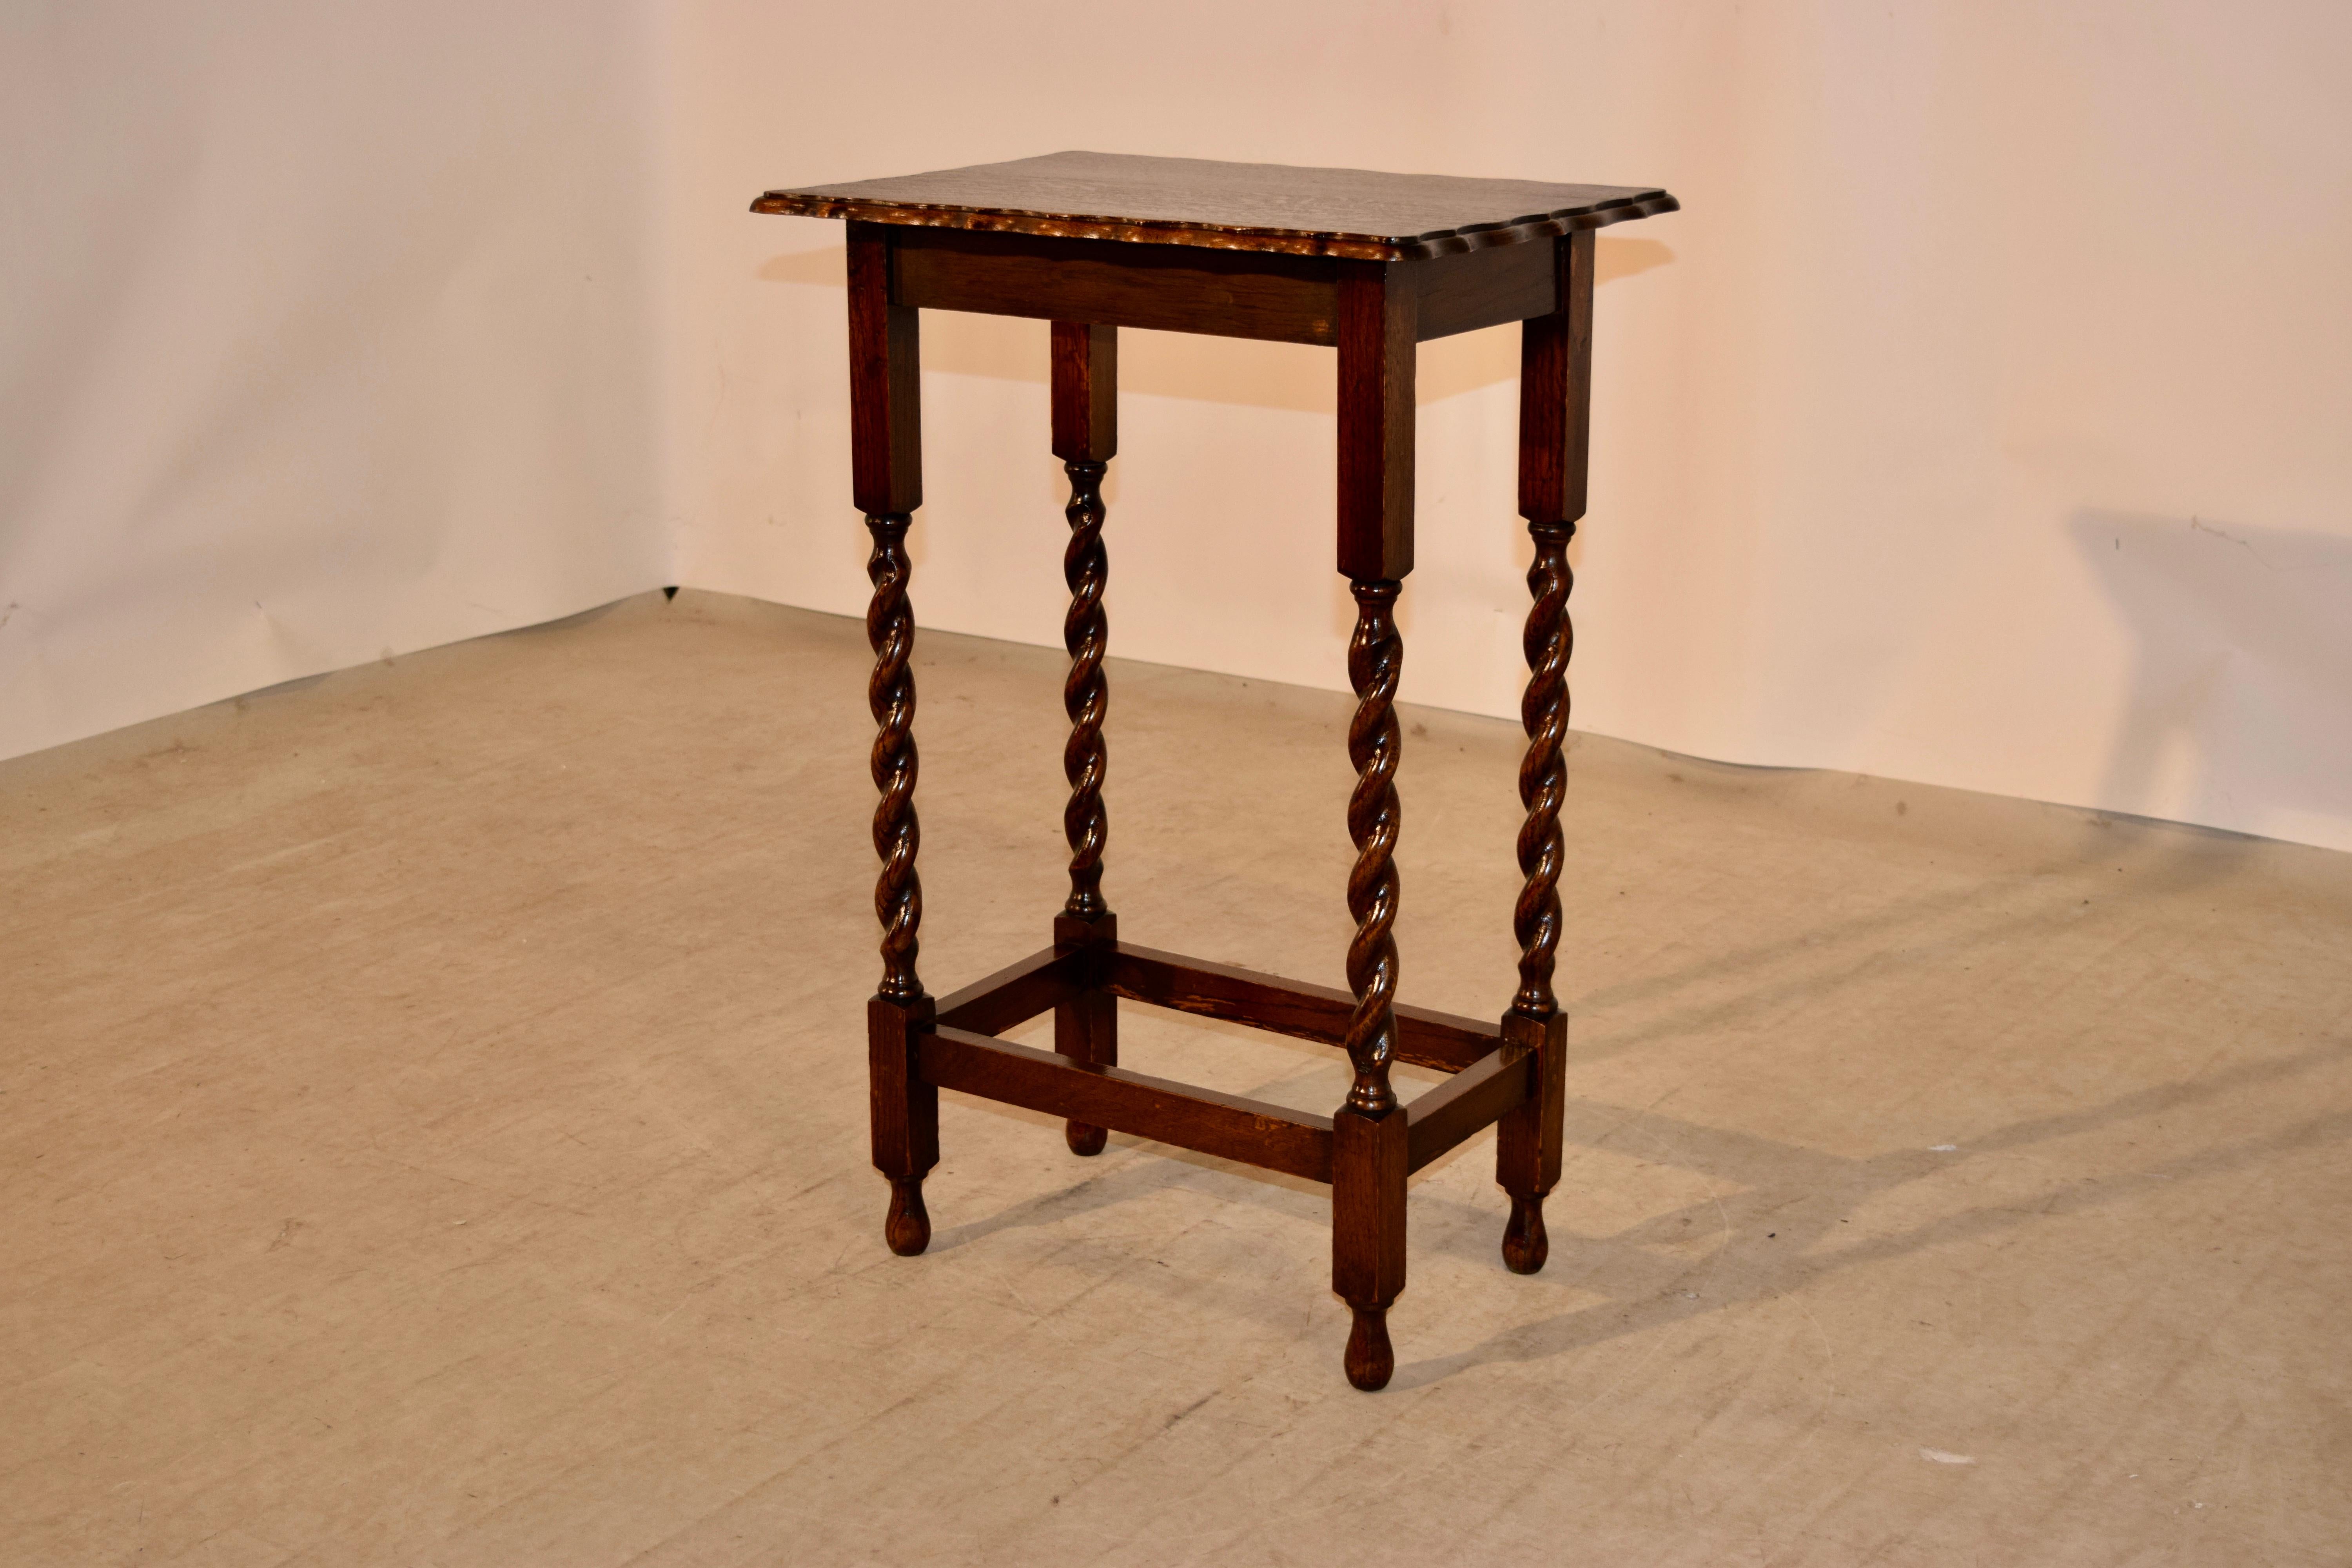 Oak side table from England with a beveled and scalloped edge around the top following down to a simple apron and supported on hand-turned barley twist legs, joined by simple stretchers and raised on turned feet.